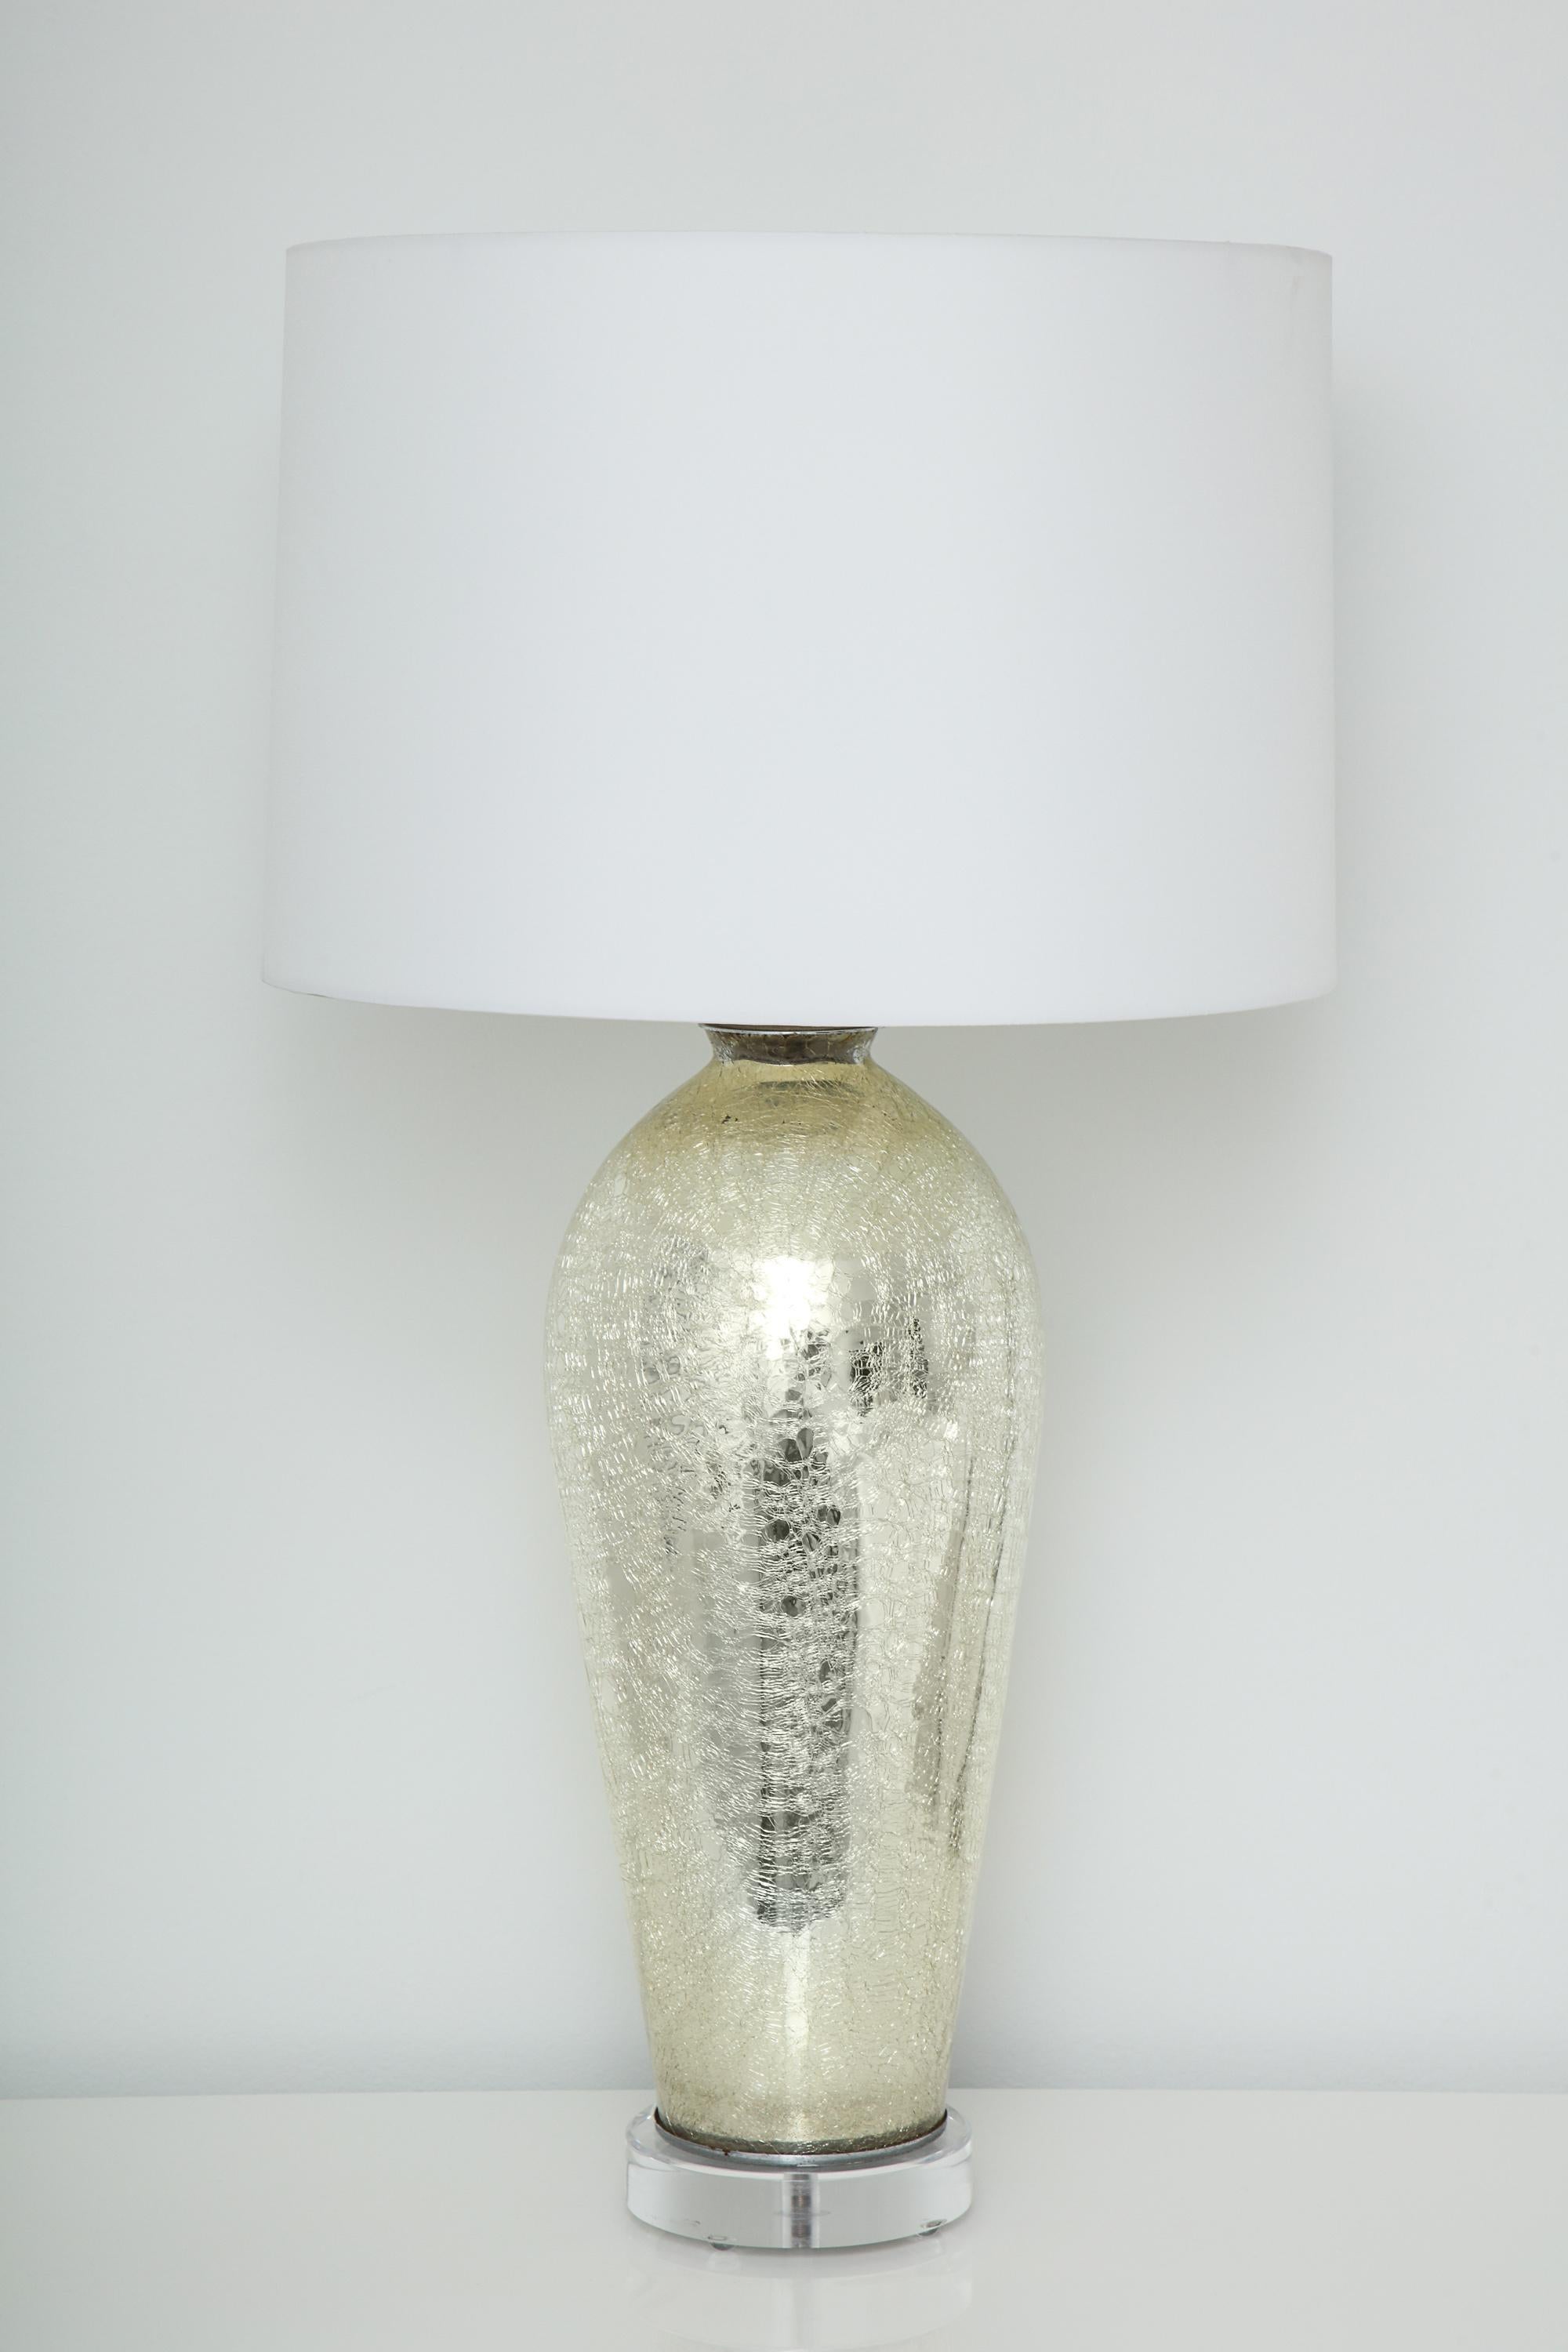 Each of ovoid form with mercury glass-like surface with antiqued craquelure; mounted on a Lucite base. Comes with shades. Height of base itself is 21.5